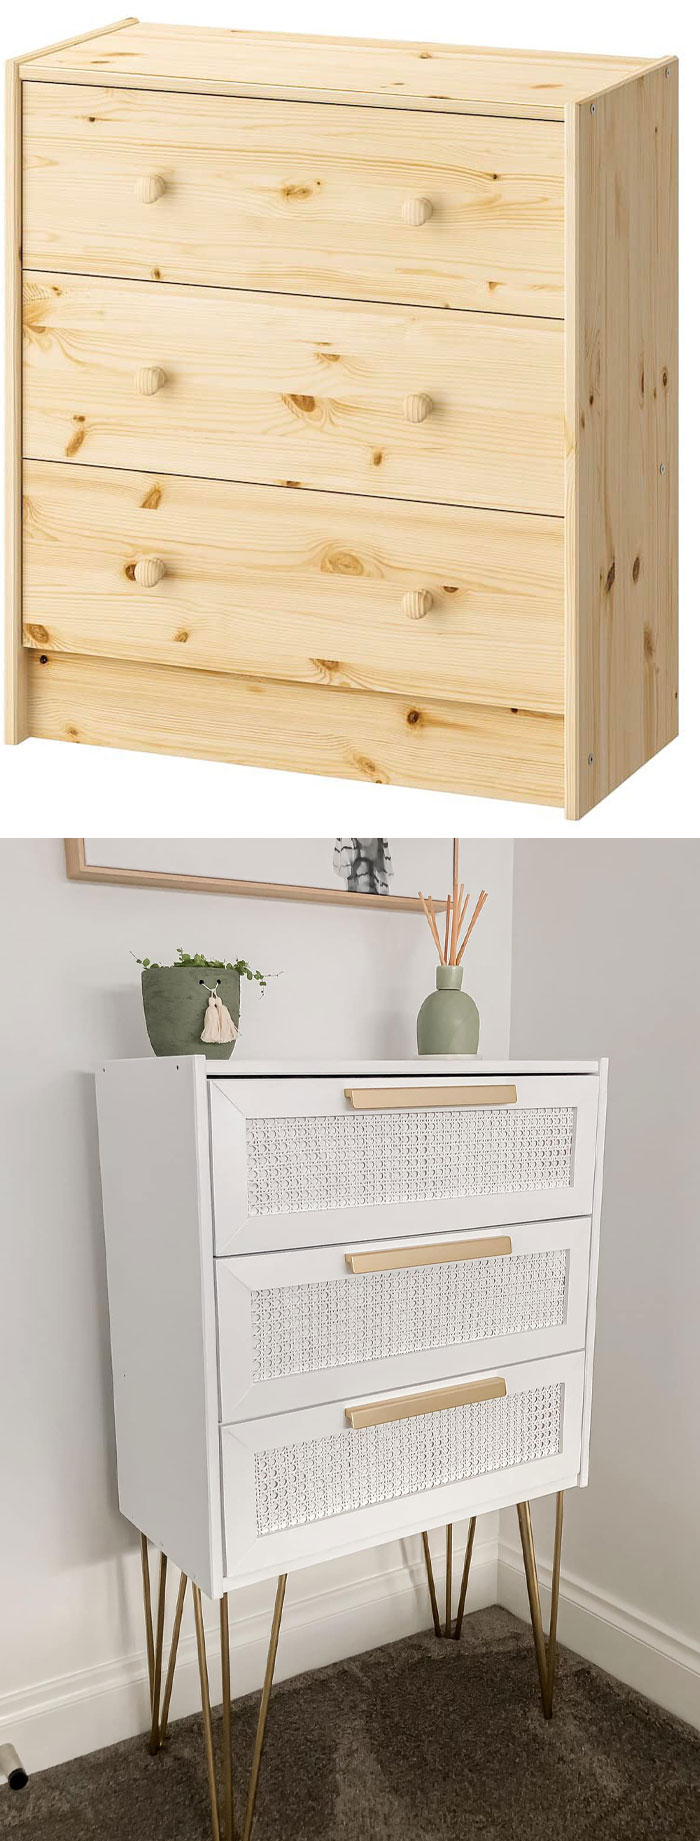 The Old Classic; The IKEA Rast Drawers! I ‘Upcycled’ The Plain Pine Drawers Into A Taller Drawer Unit, After Not Being Able To Fond Quite What I Was Looking For Online. Hope You Like This Little Project